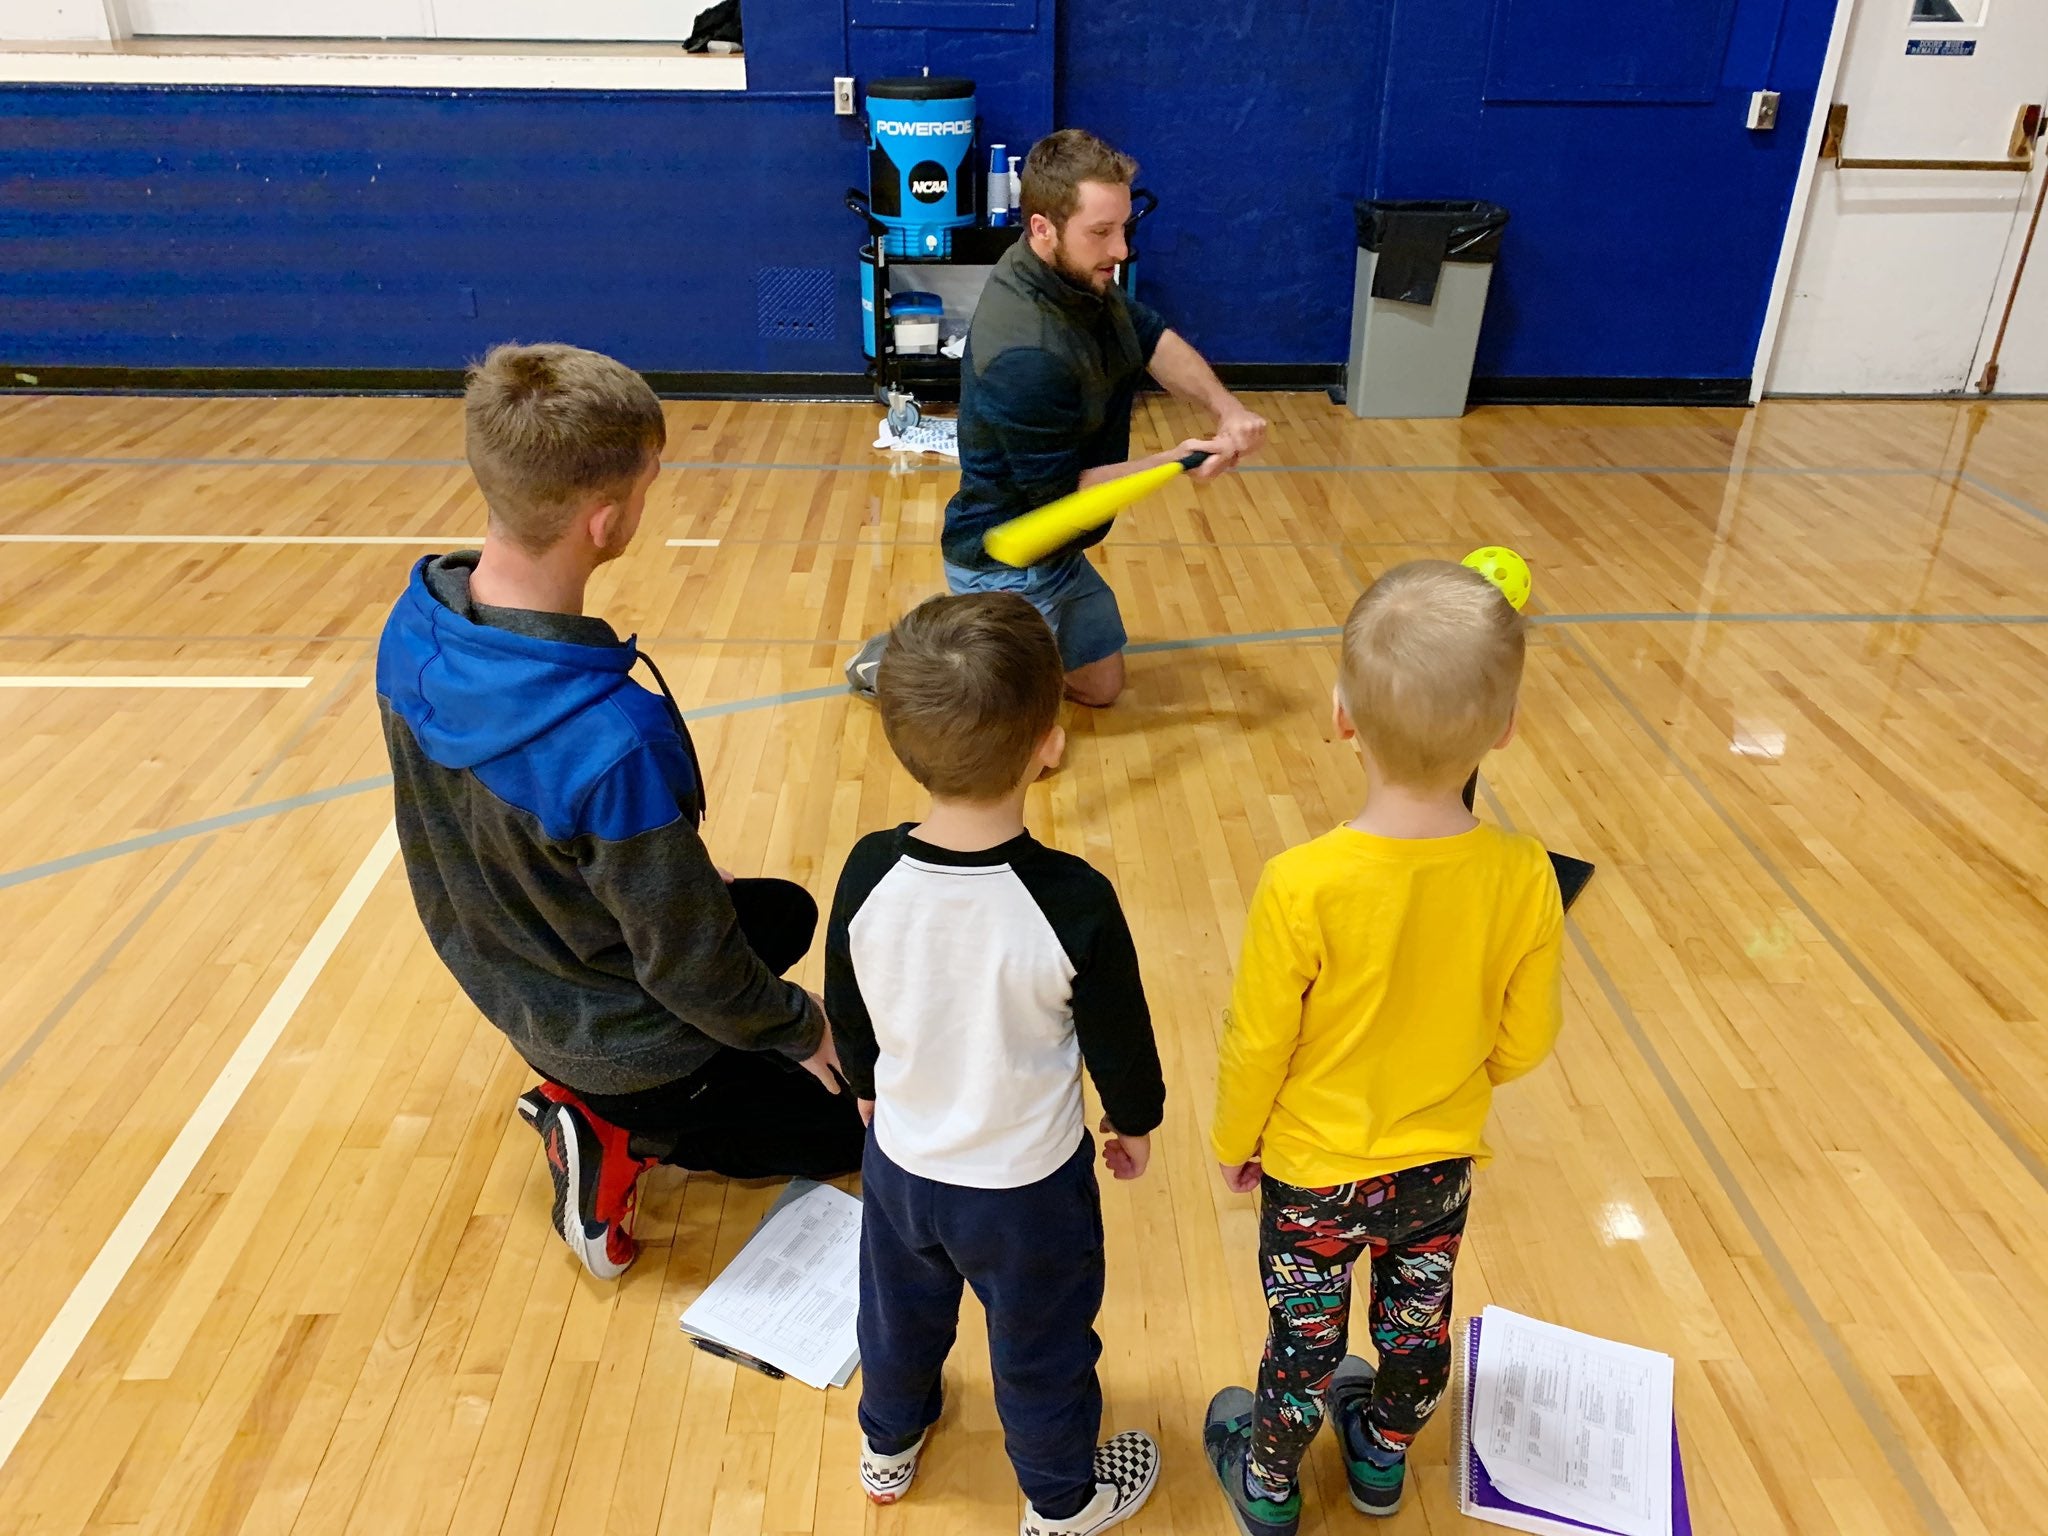 Kinesiology college student demonstrates batting techniques to preschoolers in BroncoGym